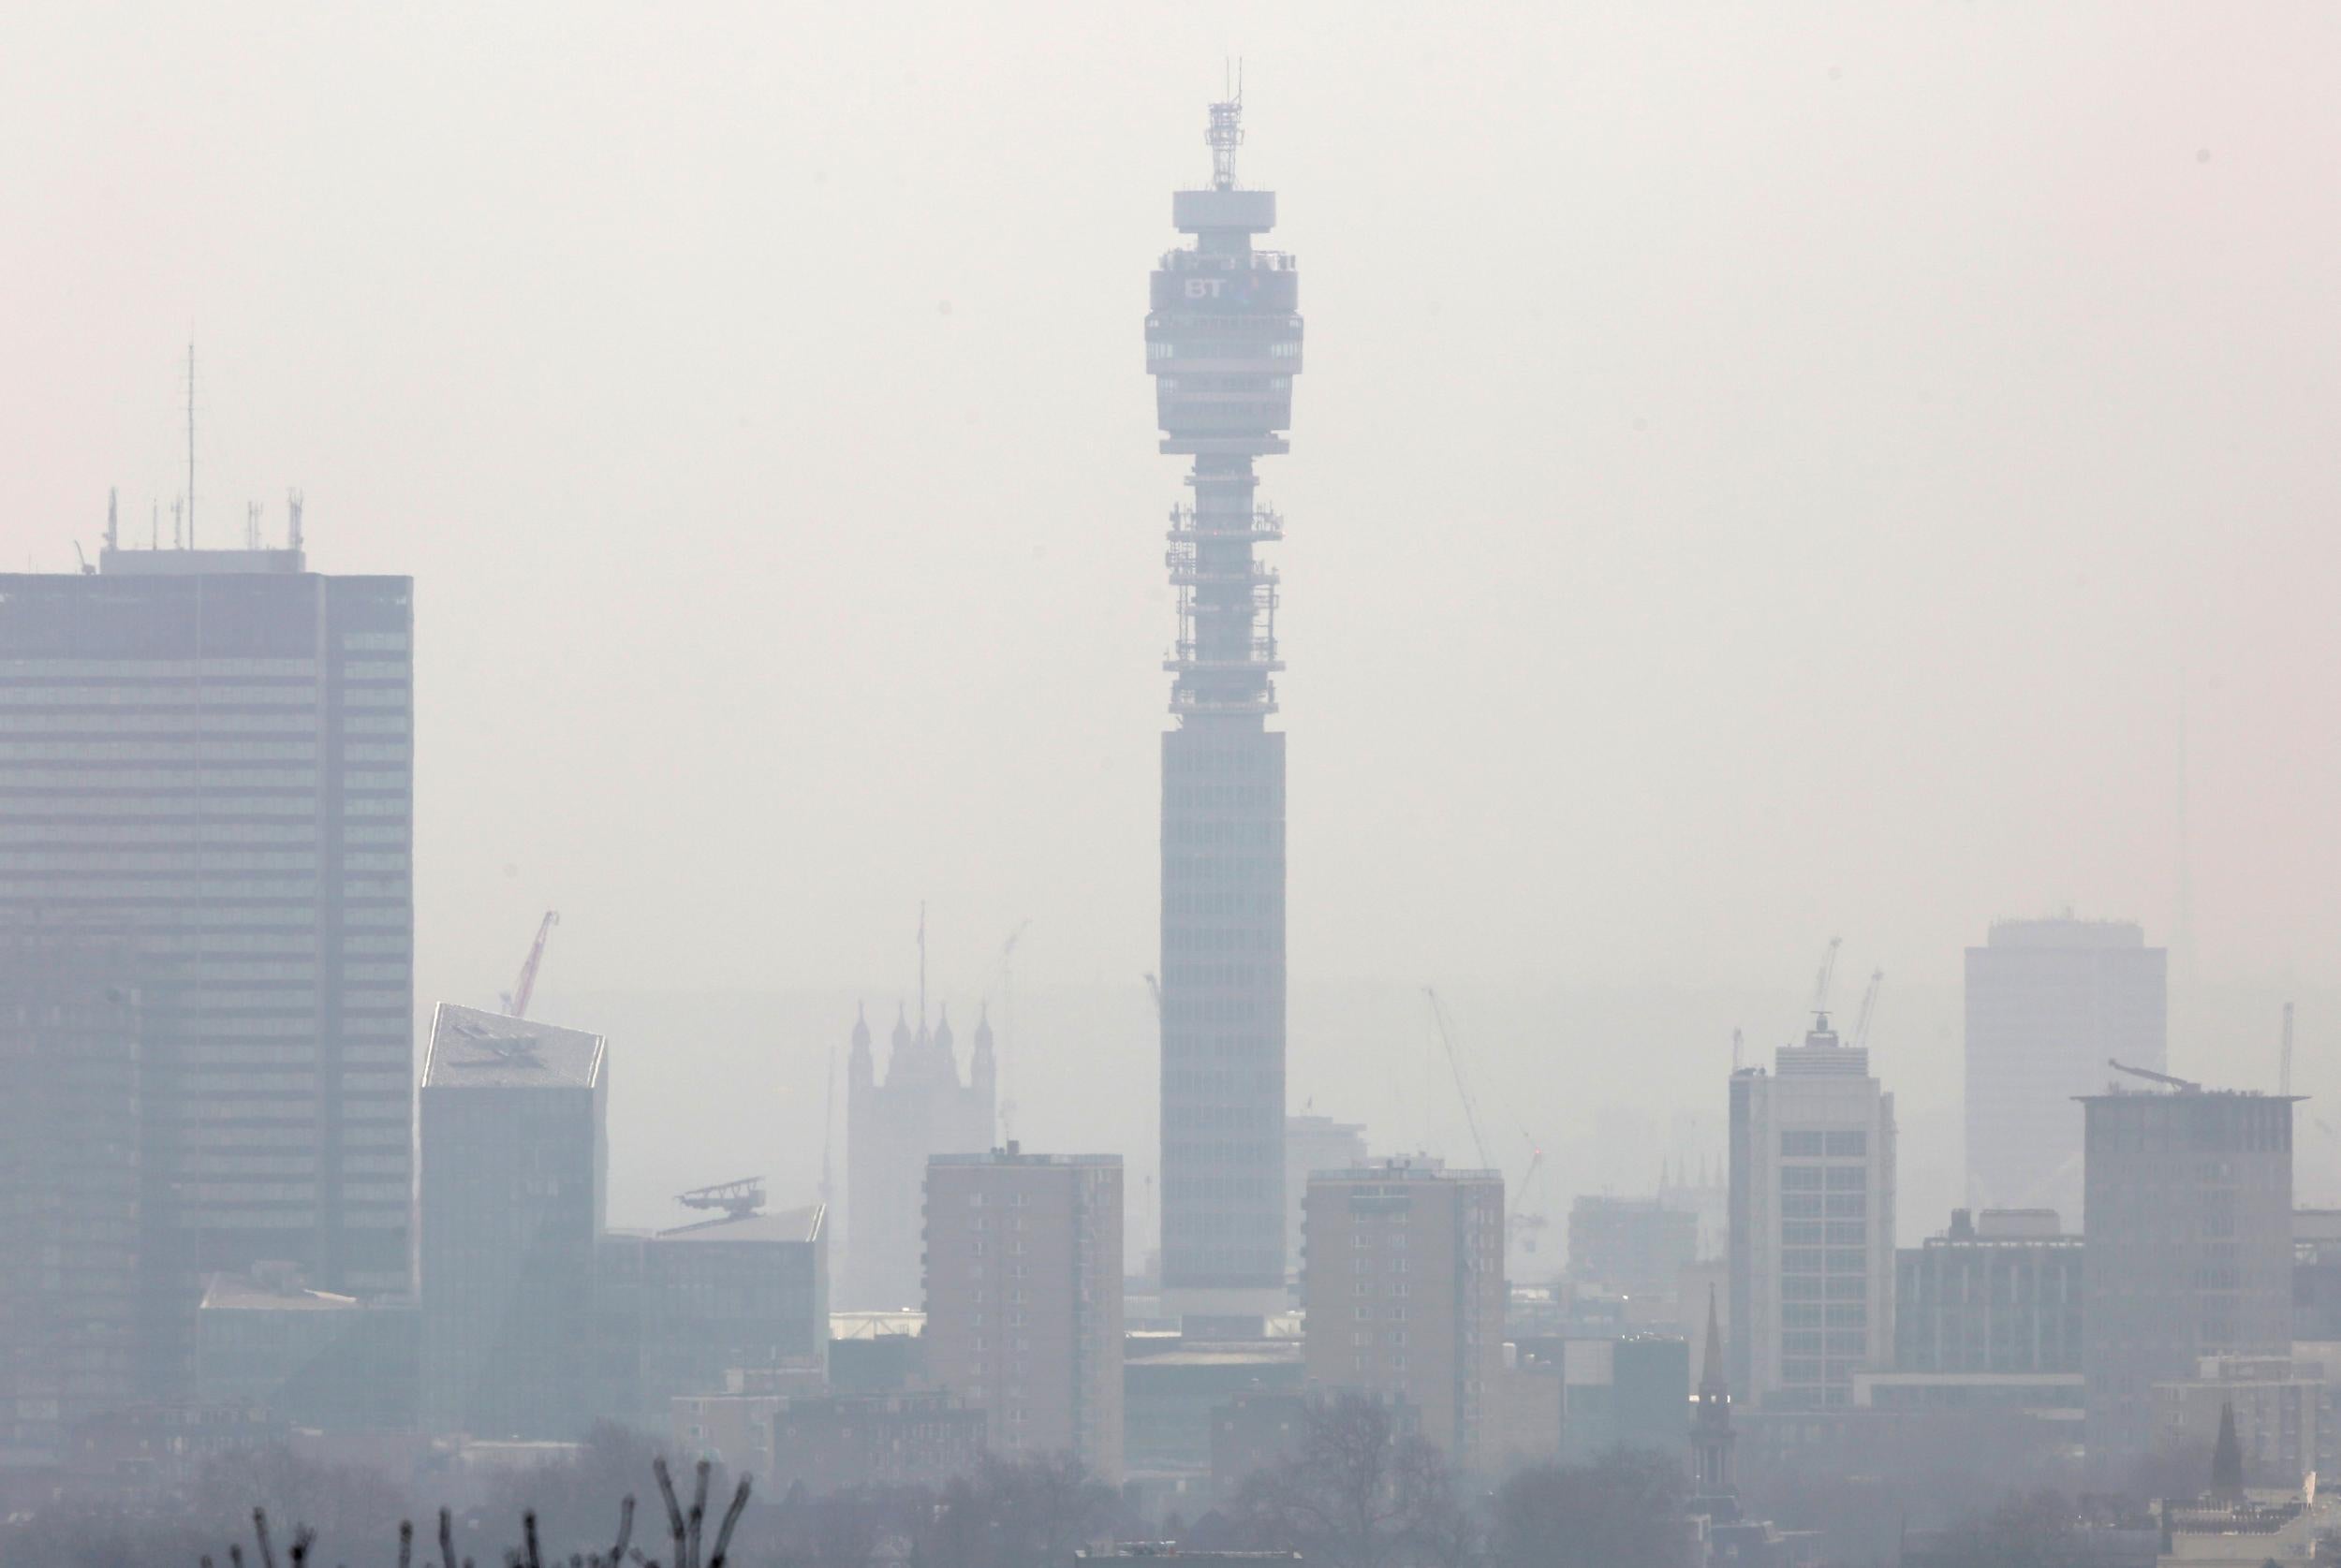 Smog in London in particular has reached health crisis levels